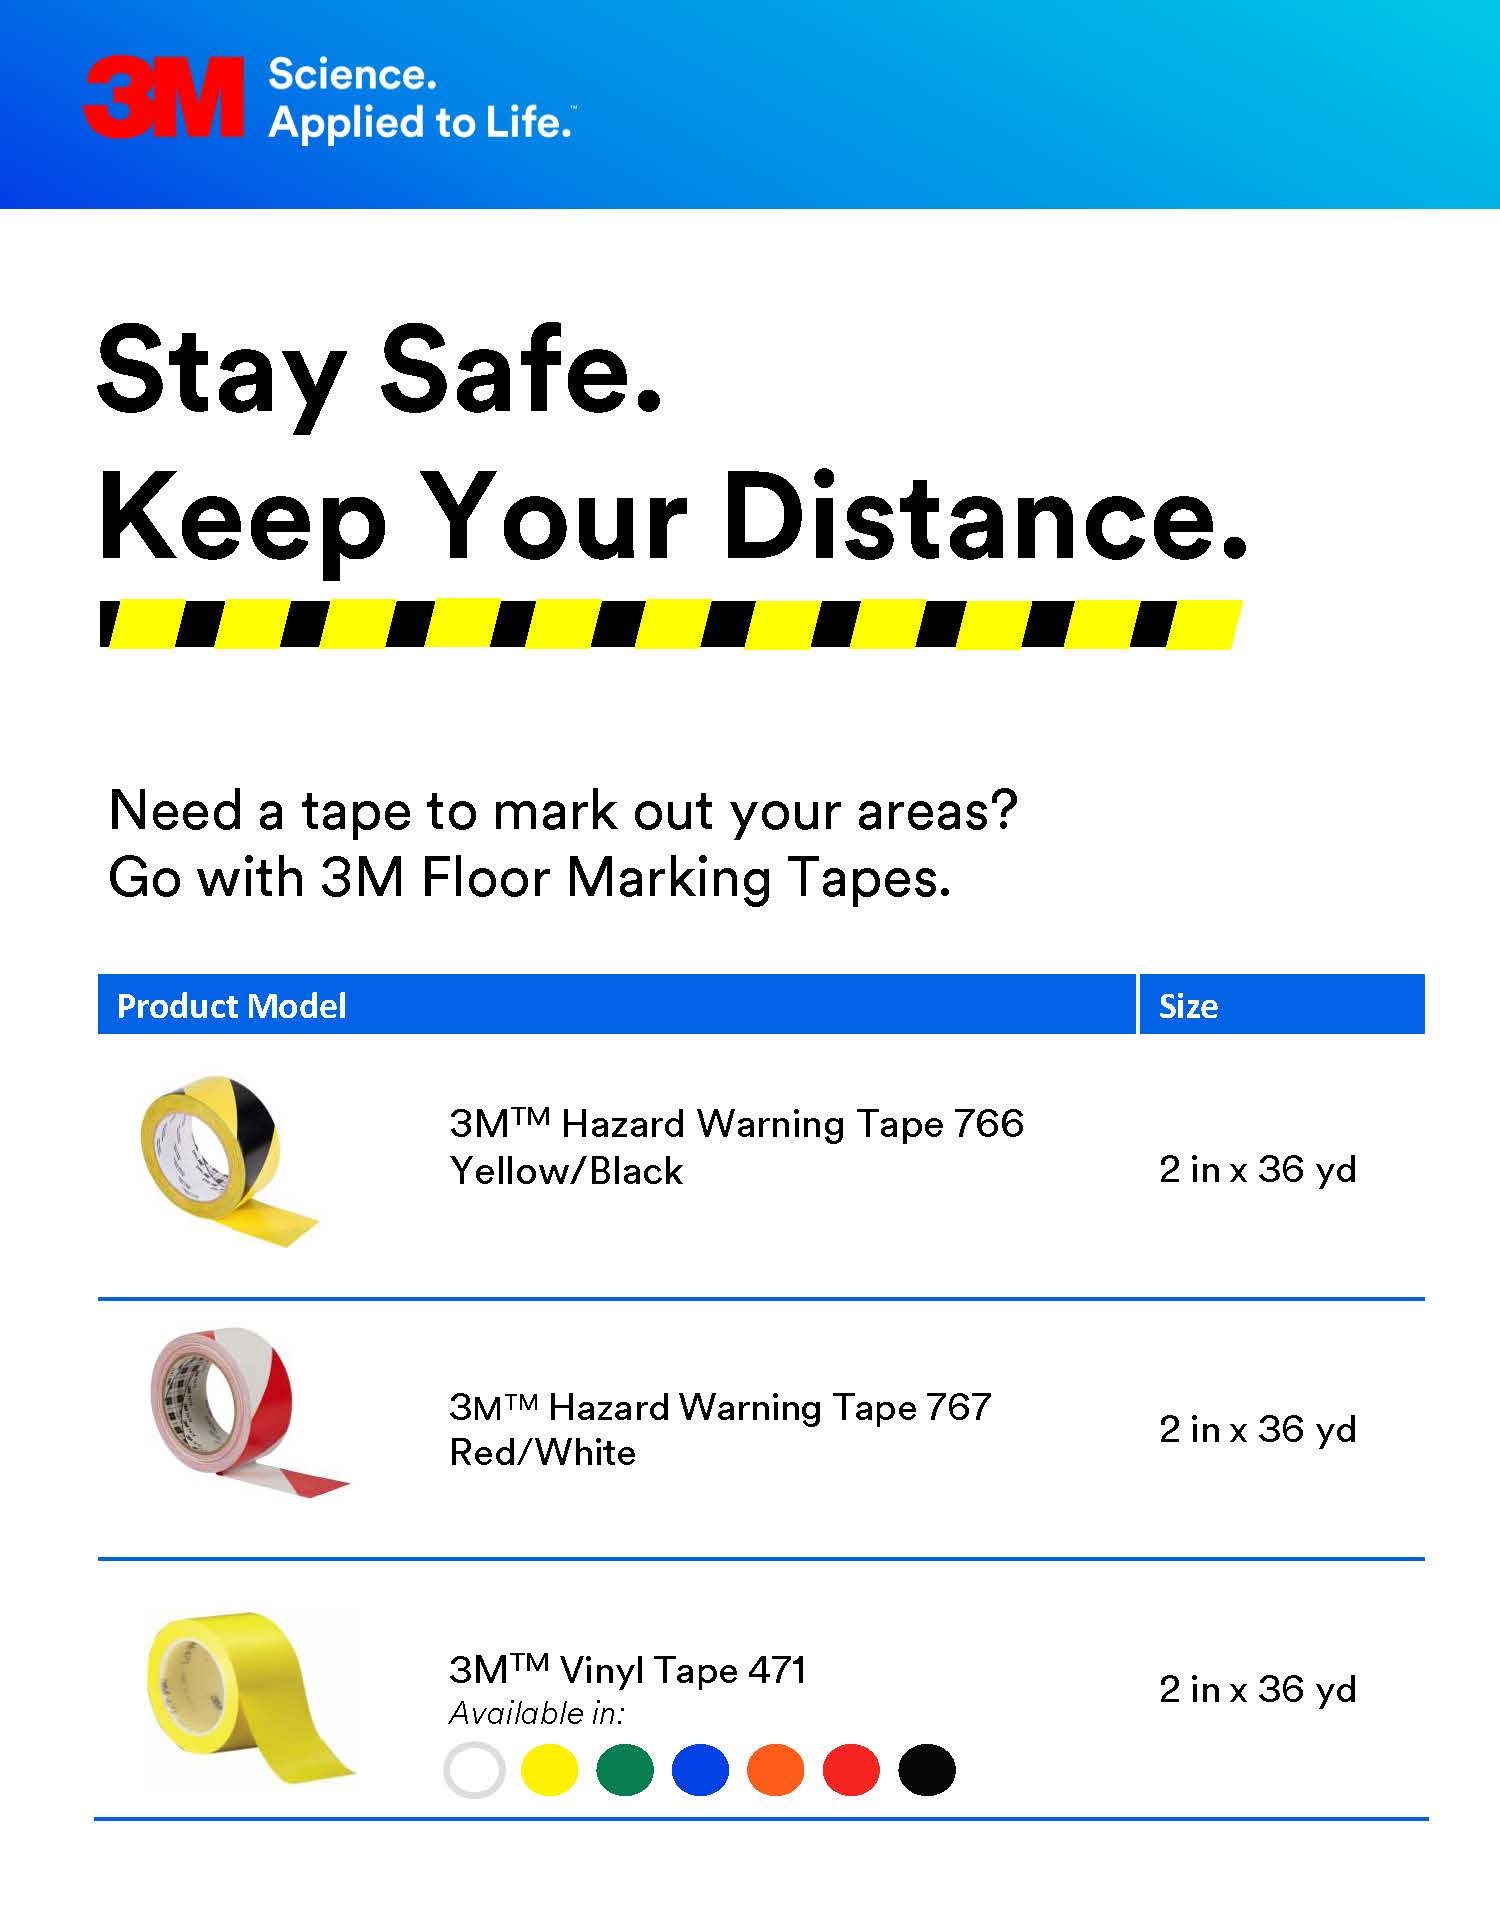 Keep Your Distance with 3M Floor Marking Tapes LKHE